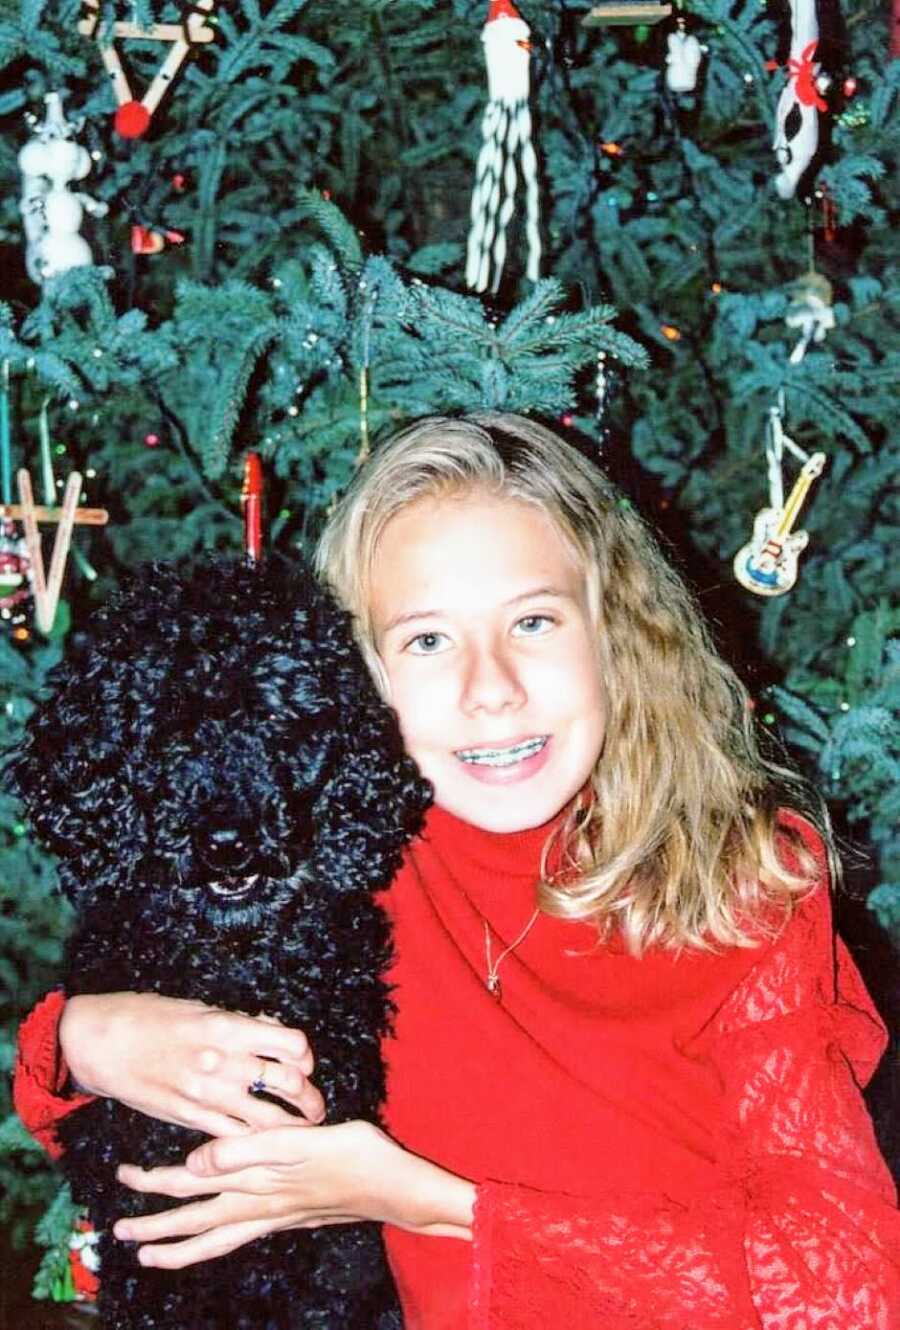 Young girl poses in front of the Christmas tree in a red sweater while hugging a black poodle